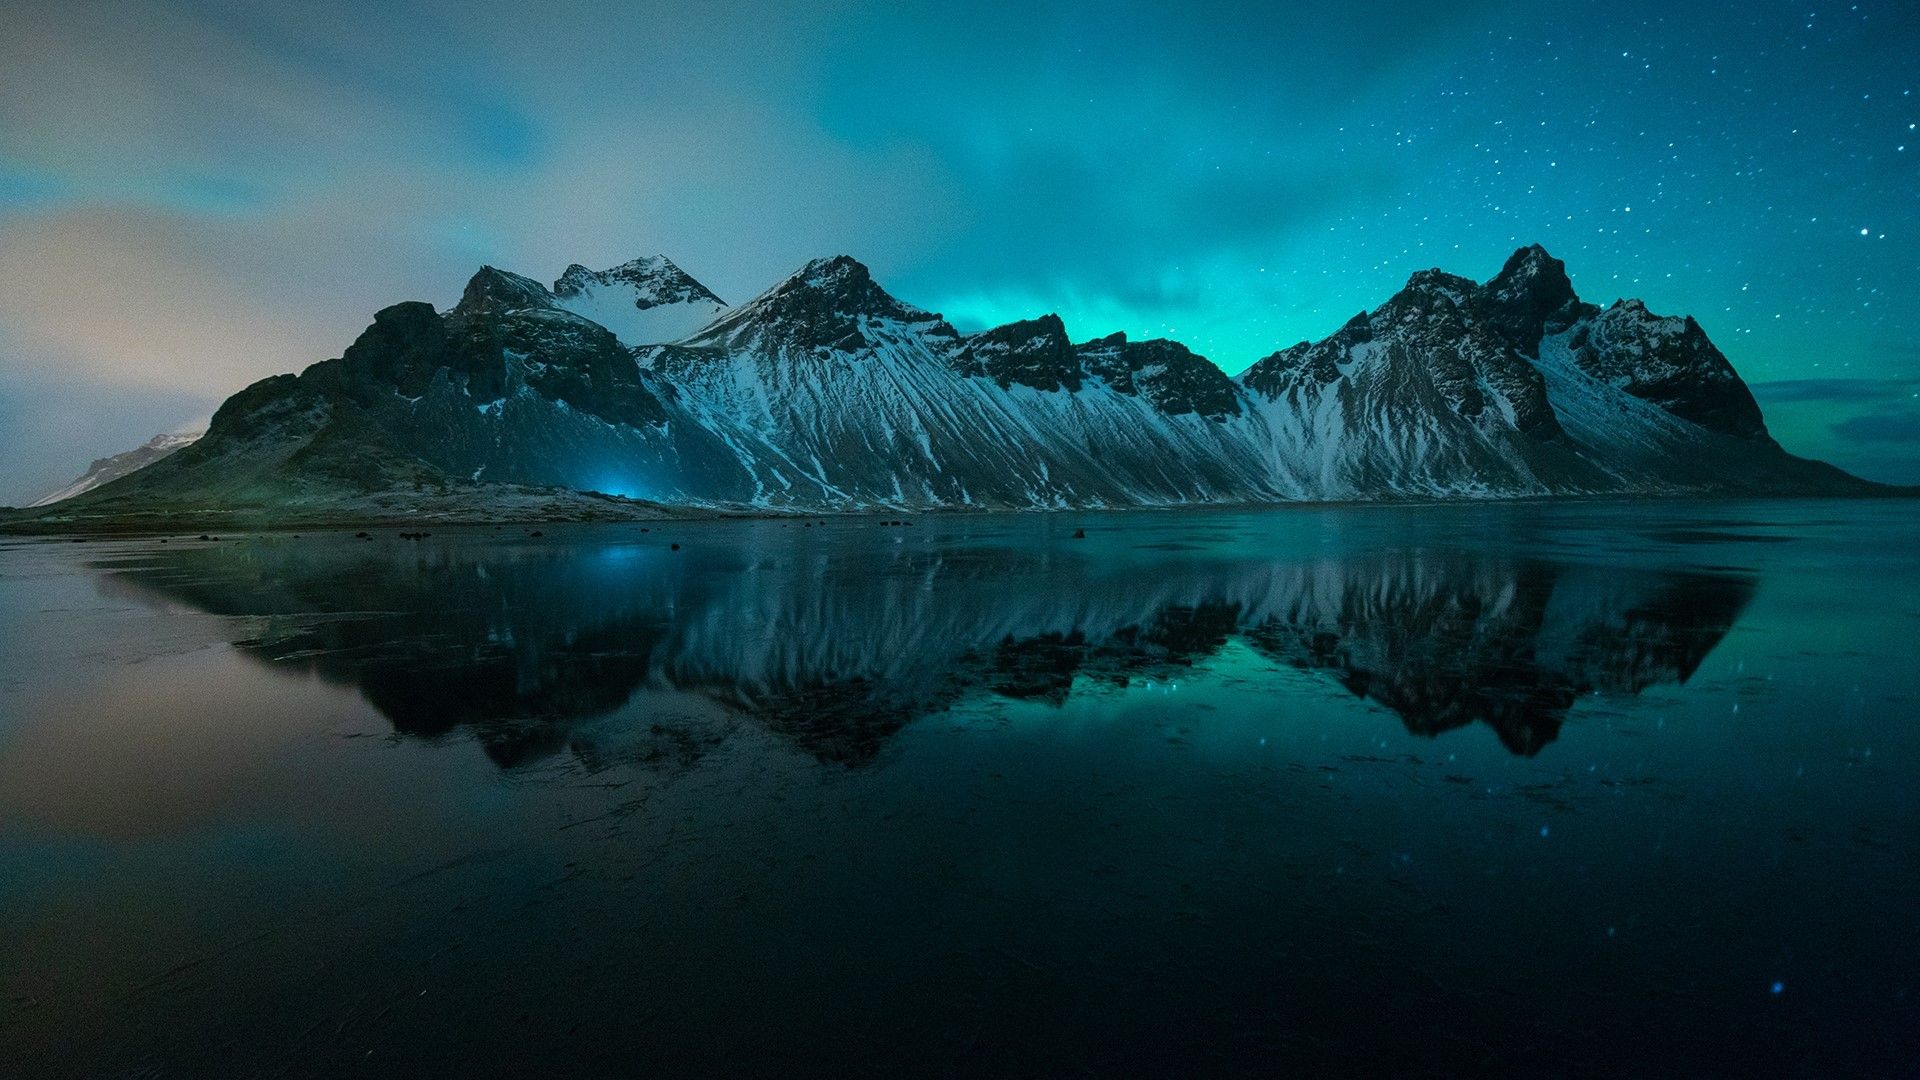 The aurora borealis is reflected in a lake - Cyan